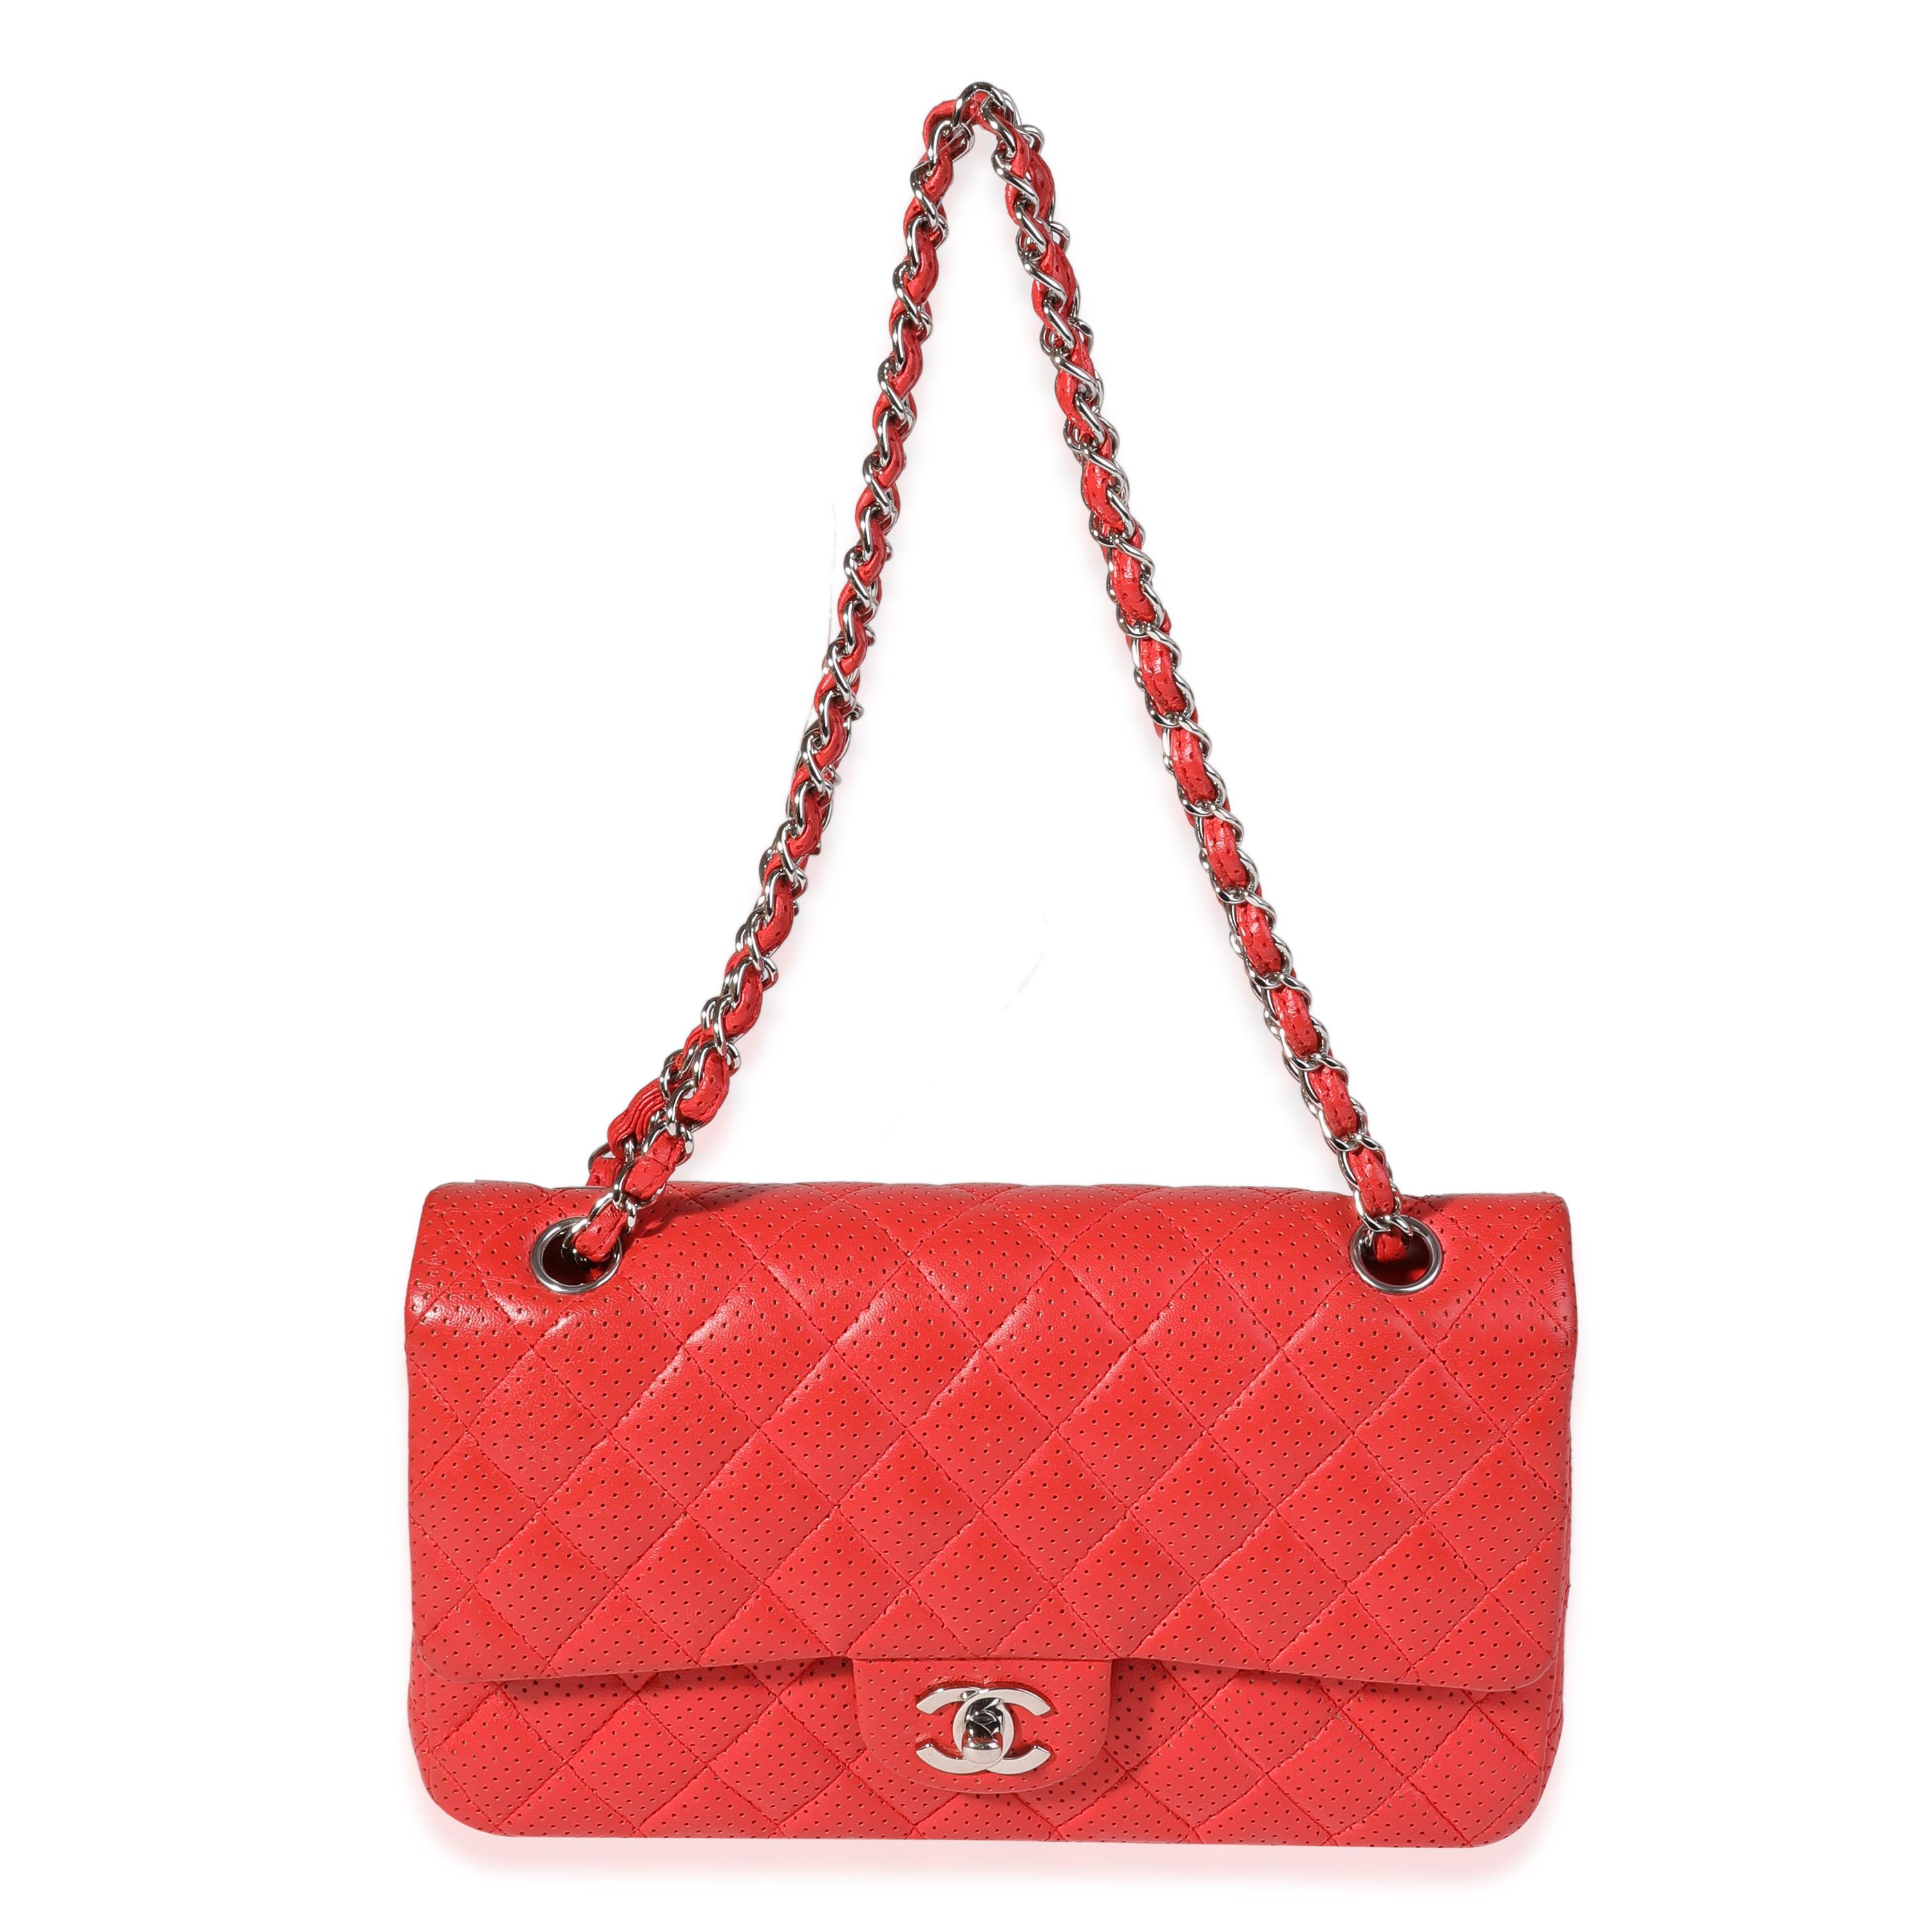 Chanel Red Perforated Leather Medium Classic Double Flap Bag 1